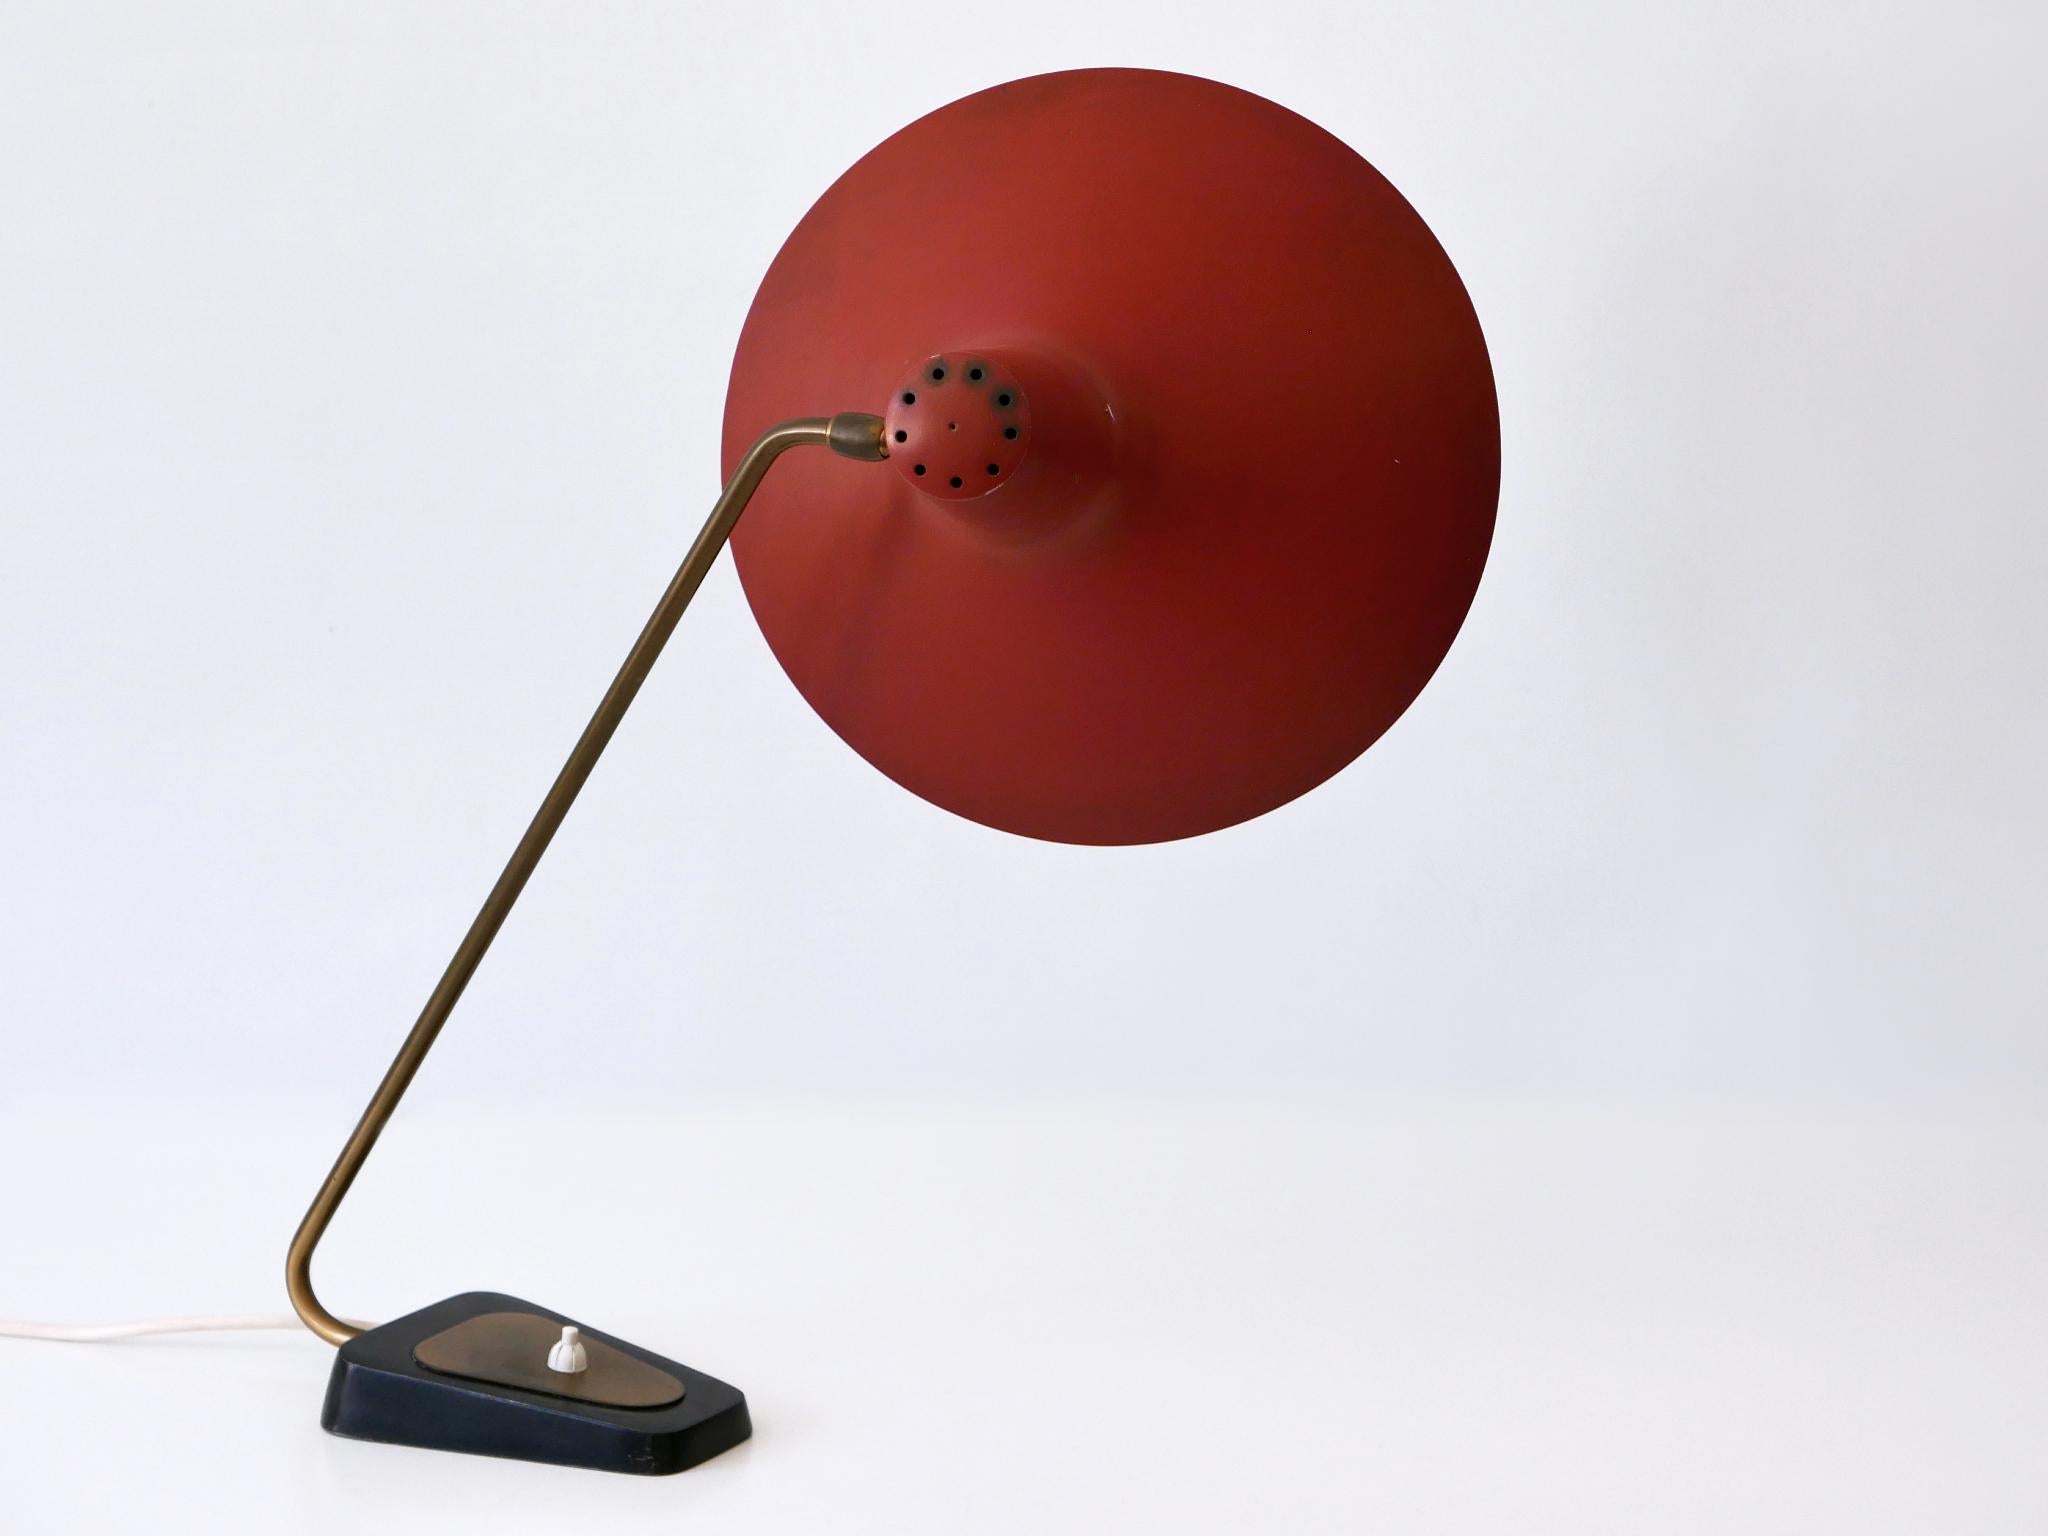 Exceptional Mid-Century Modern Table Lamp by Gebrüder Cosack Germany 1950s For Sale 5